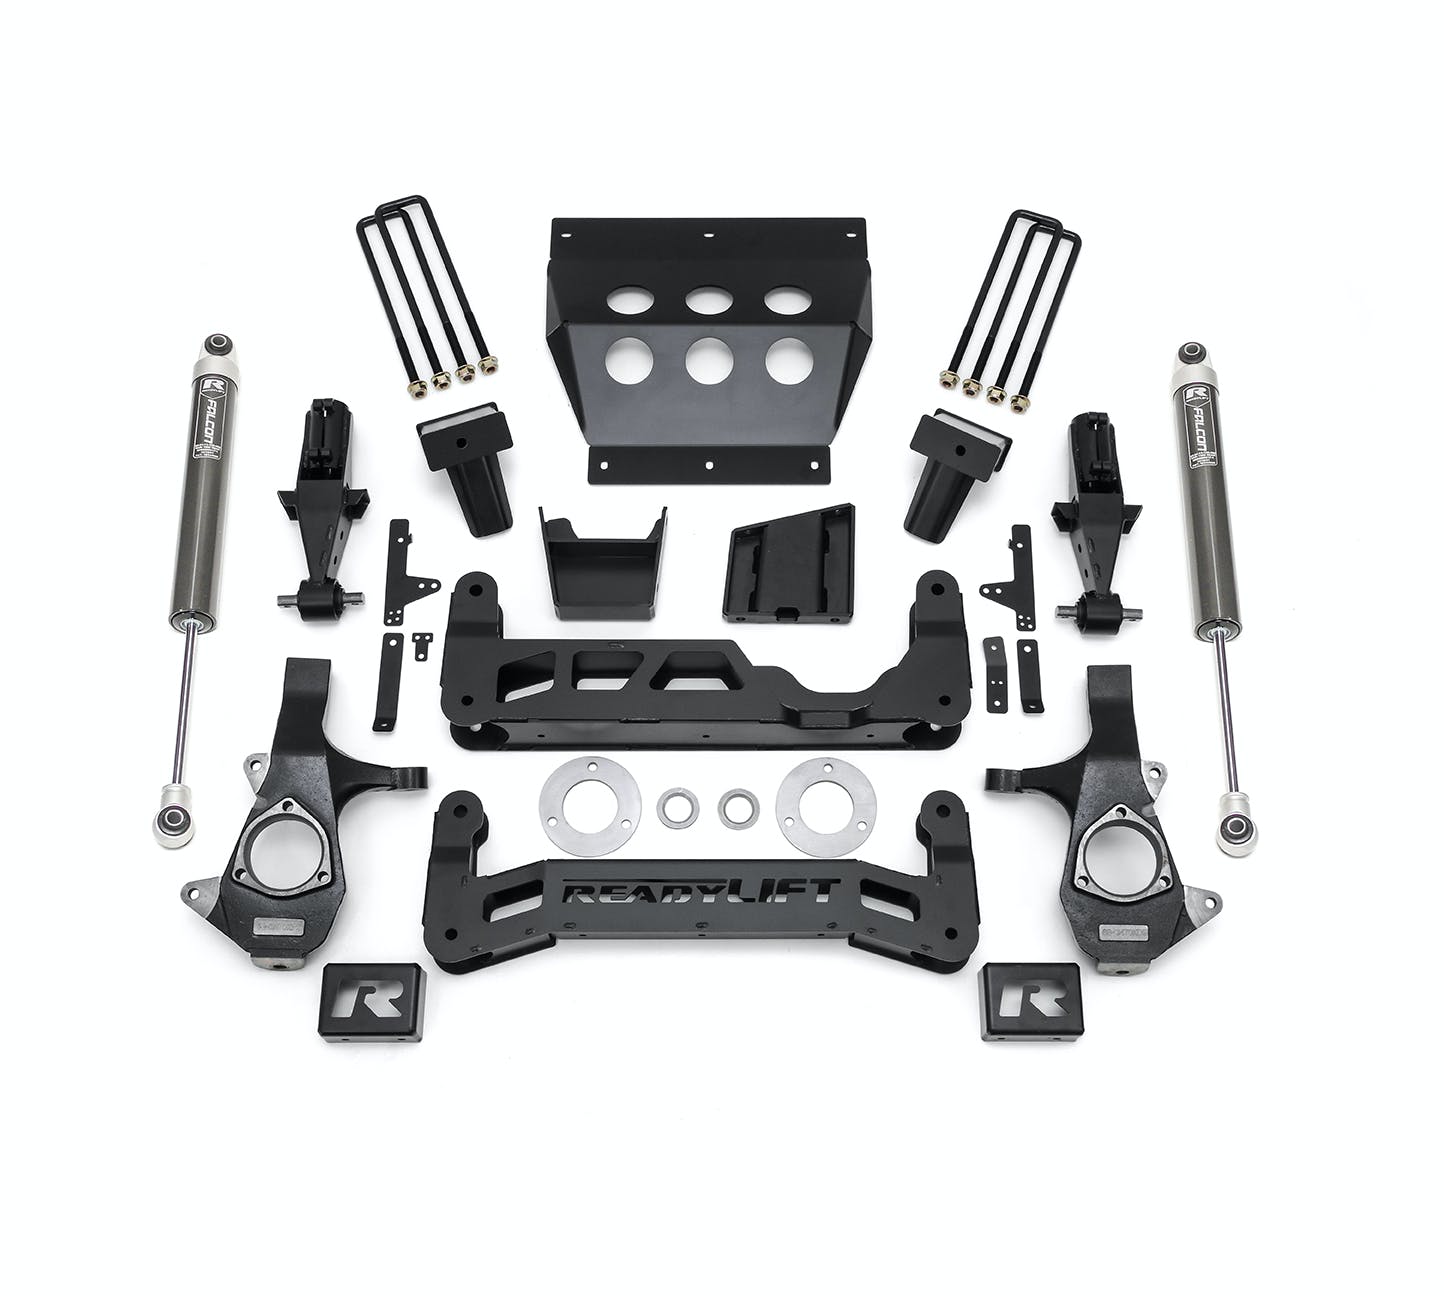 ReadyLIFT 44-34700 7" Big Lift Kit for Aluminum OE Upper Control Arms, Falcon 1.1 Monotube Shocks